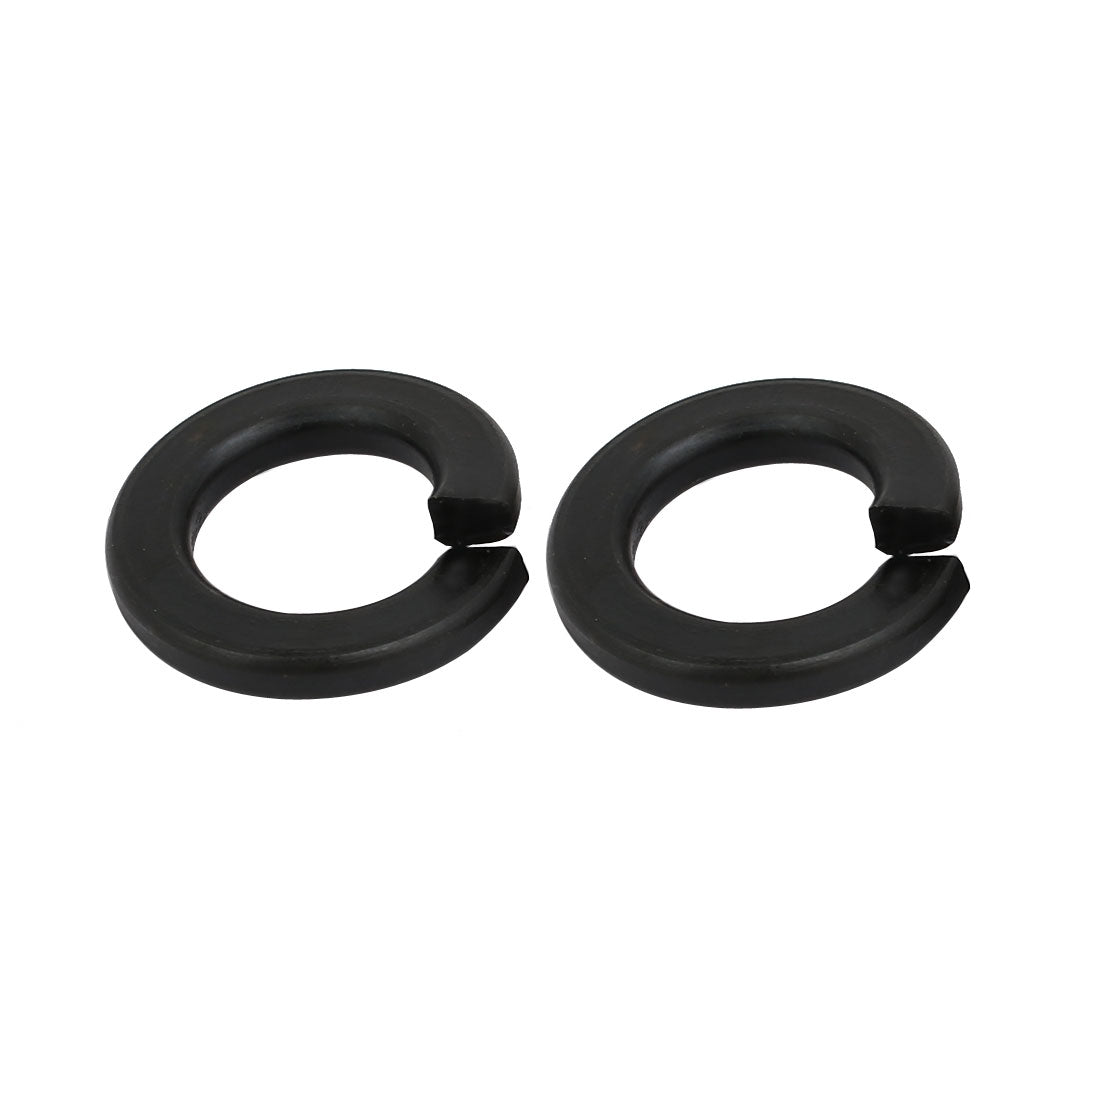 uxcell Uxcell 30pcs 1/2 Inch Inner Dia Carbon Steel Split Lock Spring Washer Gasket Black